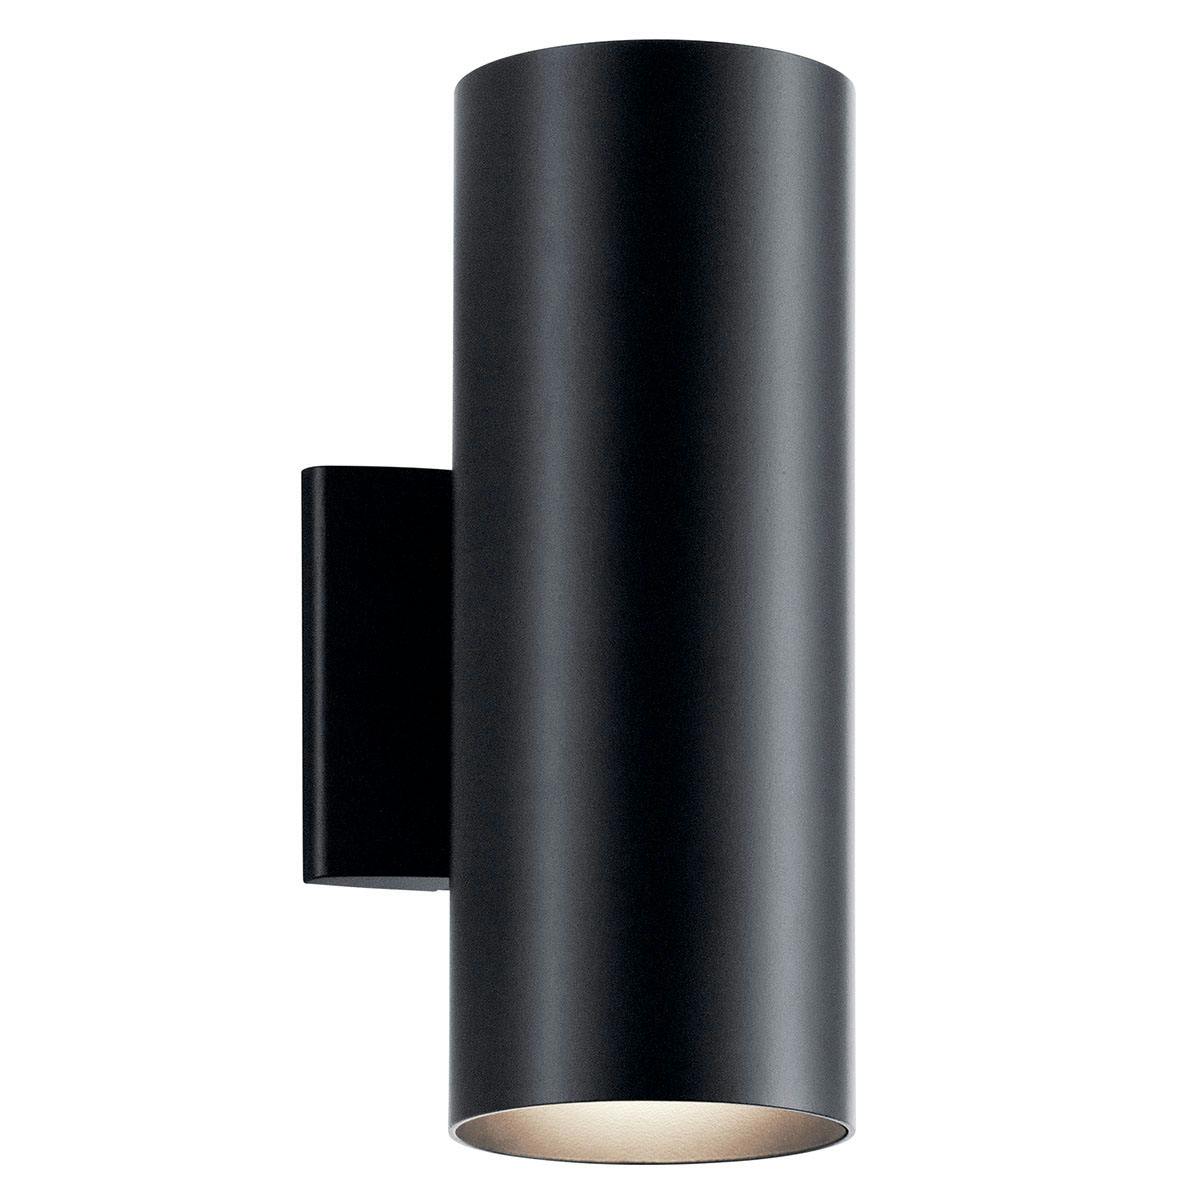 Cylinder 12" Wall Light in Black on a white background